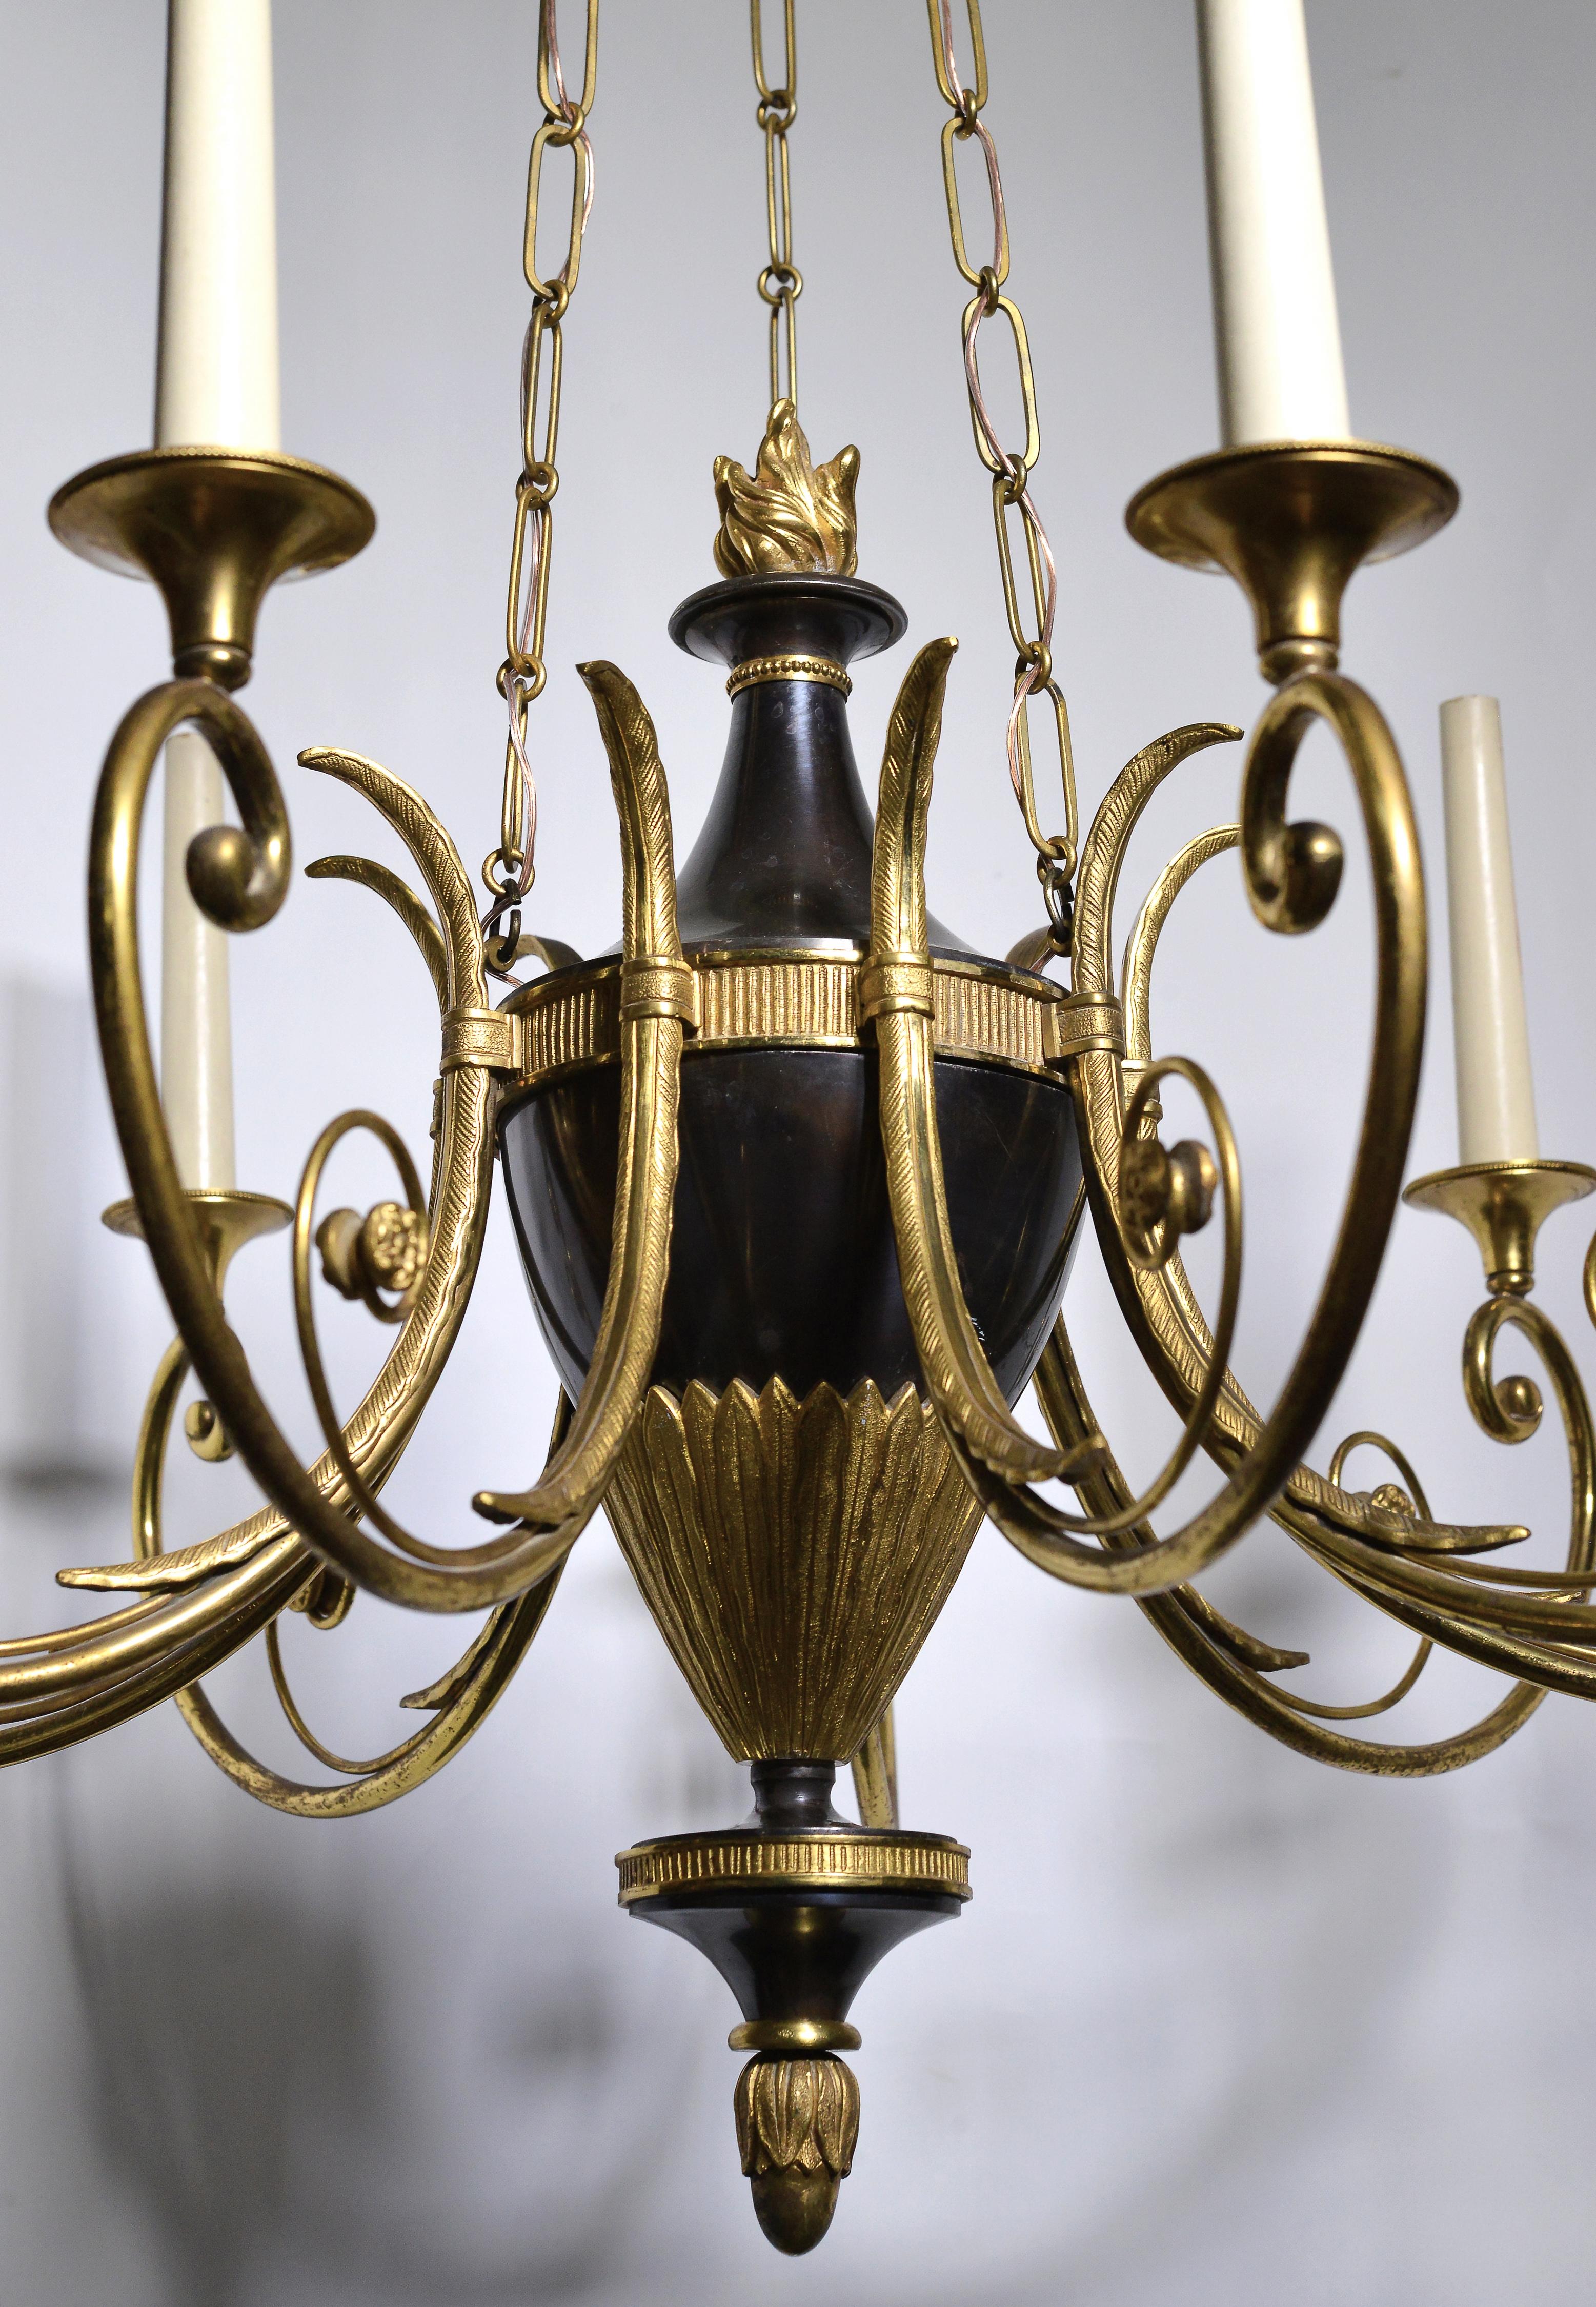 20th Century Empire Antique Chandelier Gilt Bronze and Oxidized 9 light early 20th century For Sale